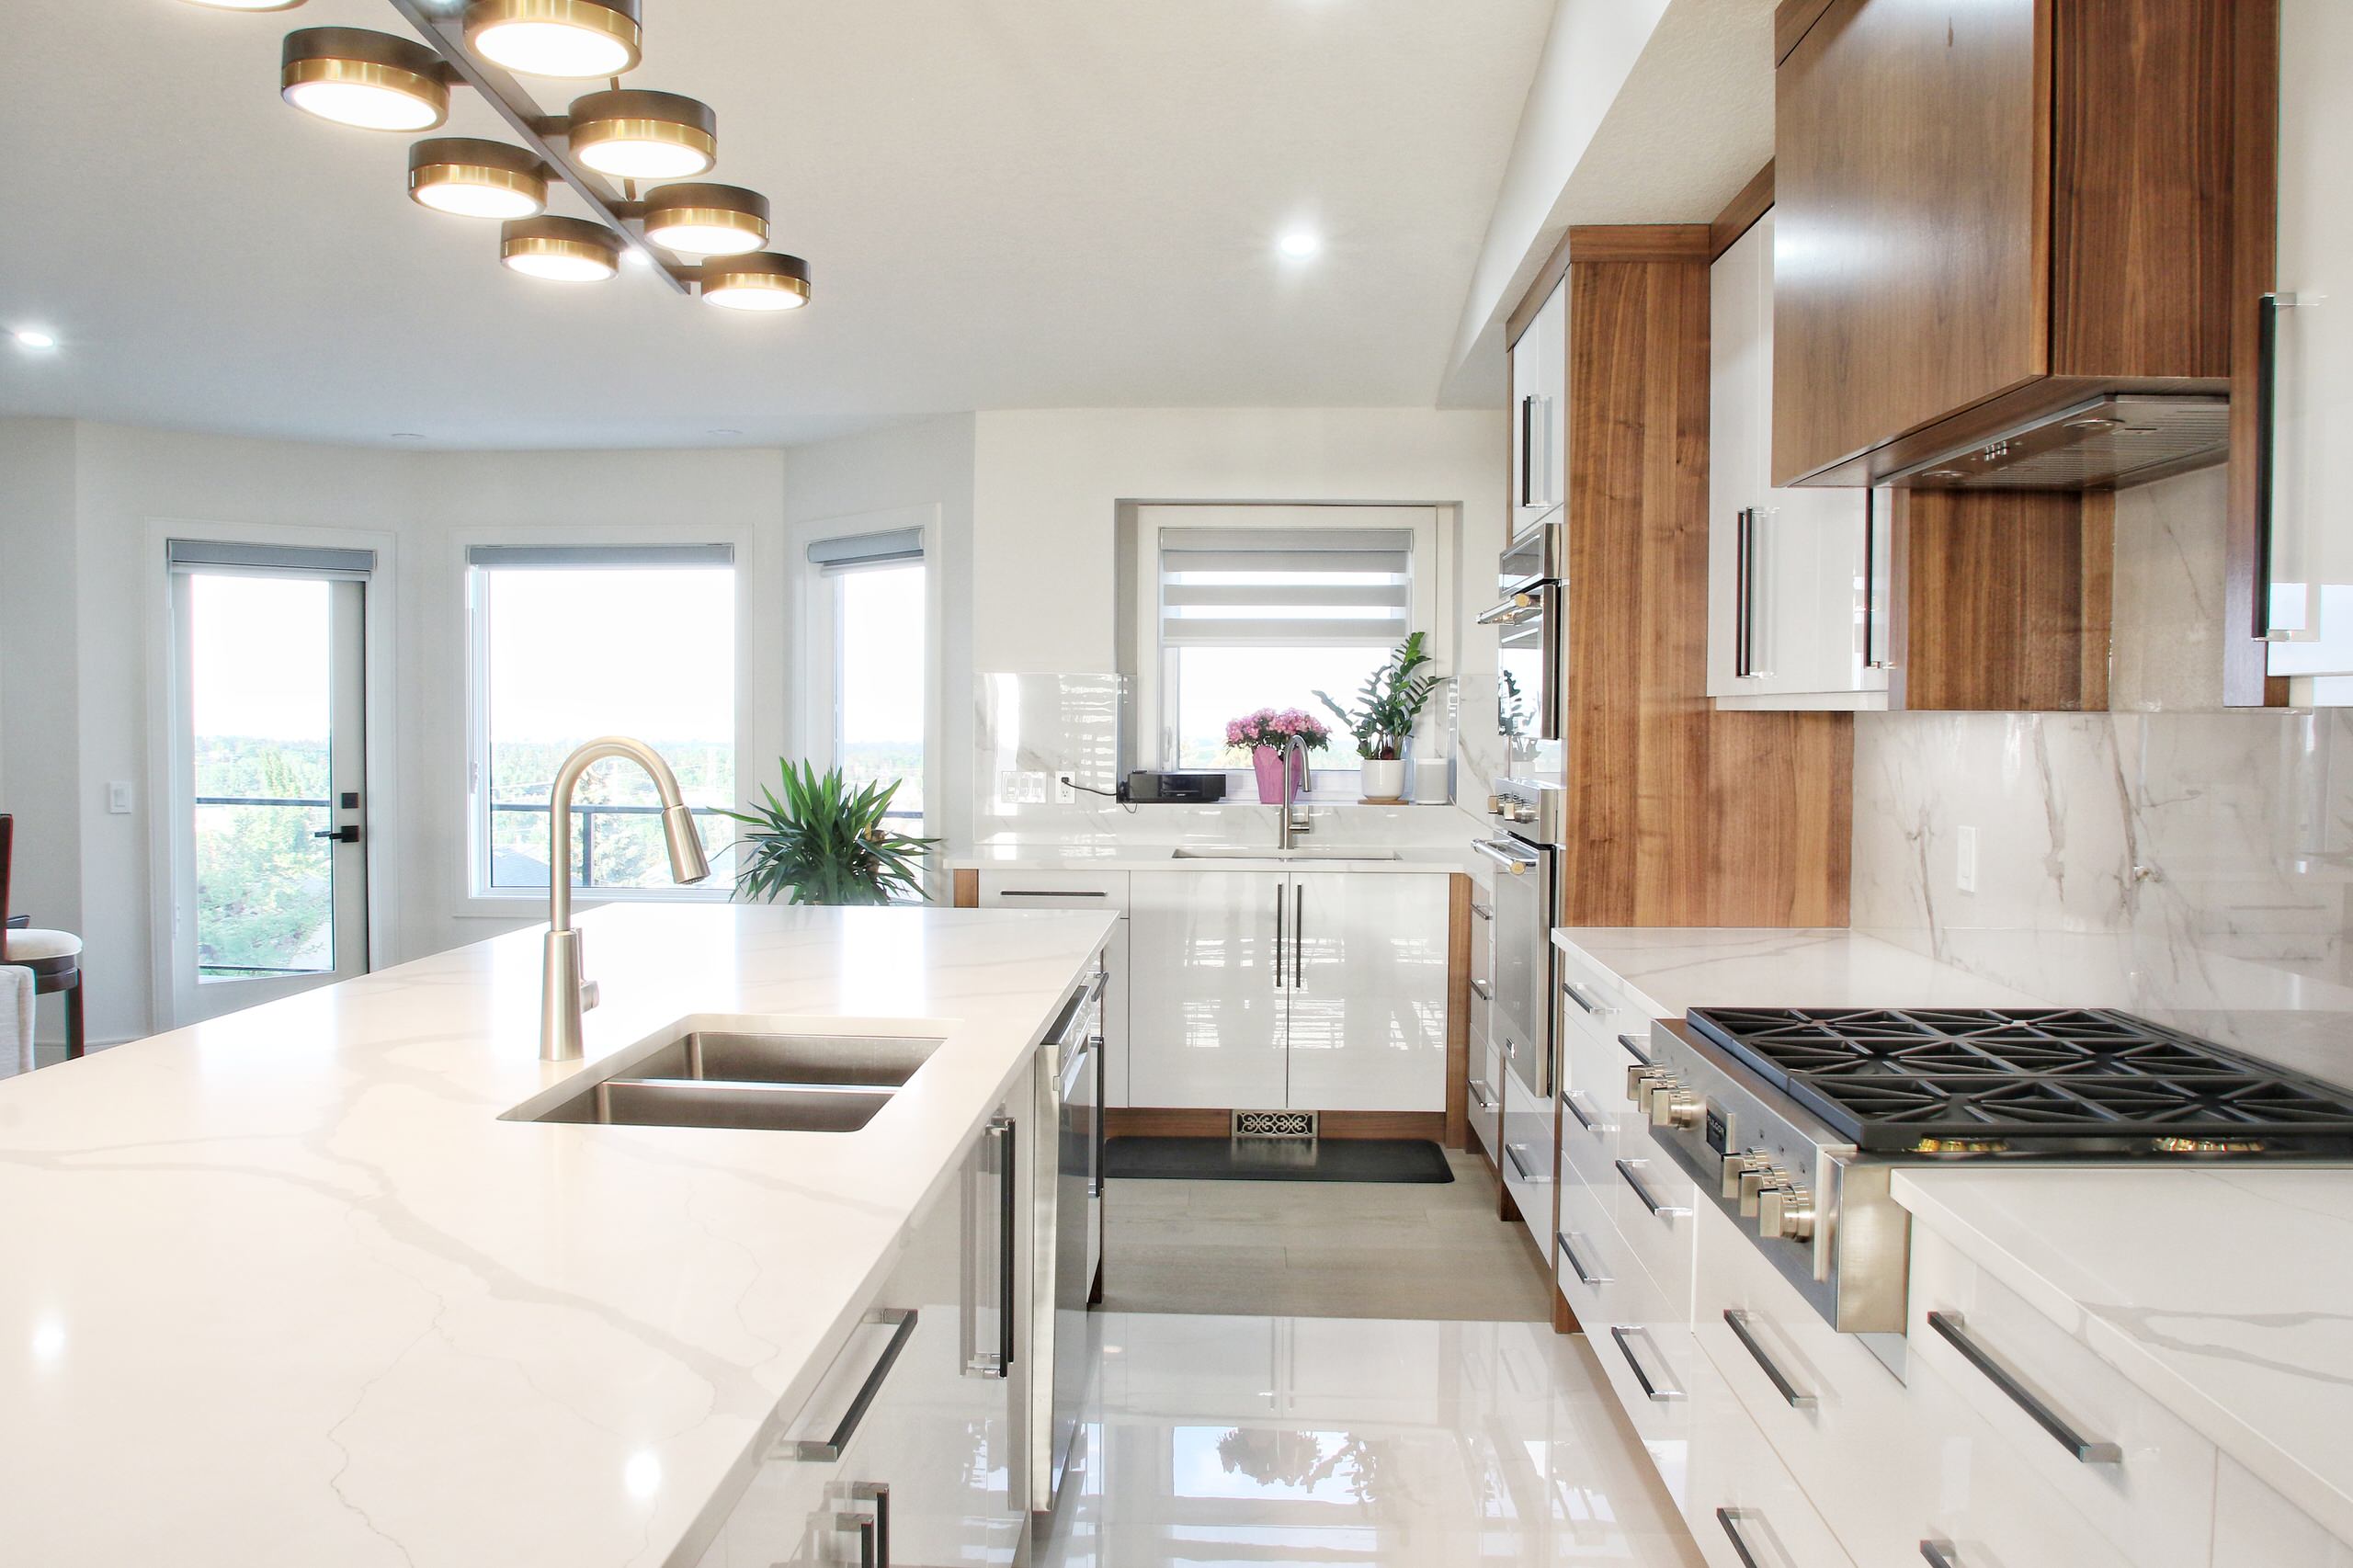 Inspiration for a modern kitchen remodel in Calgary